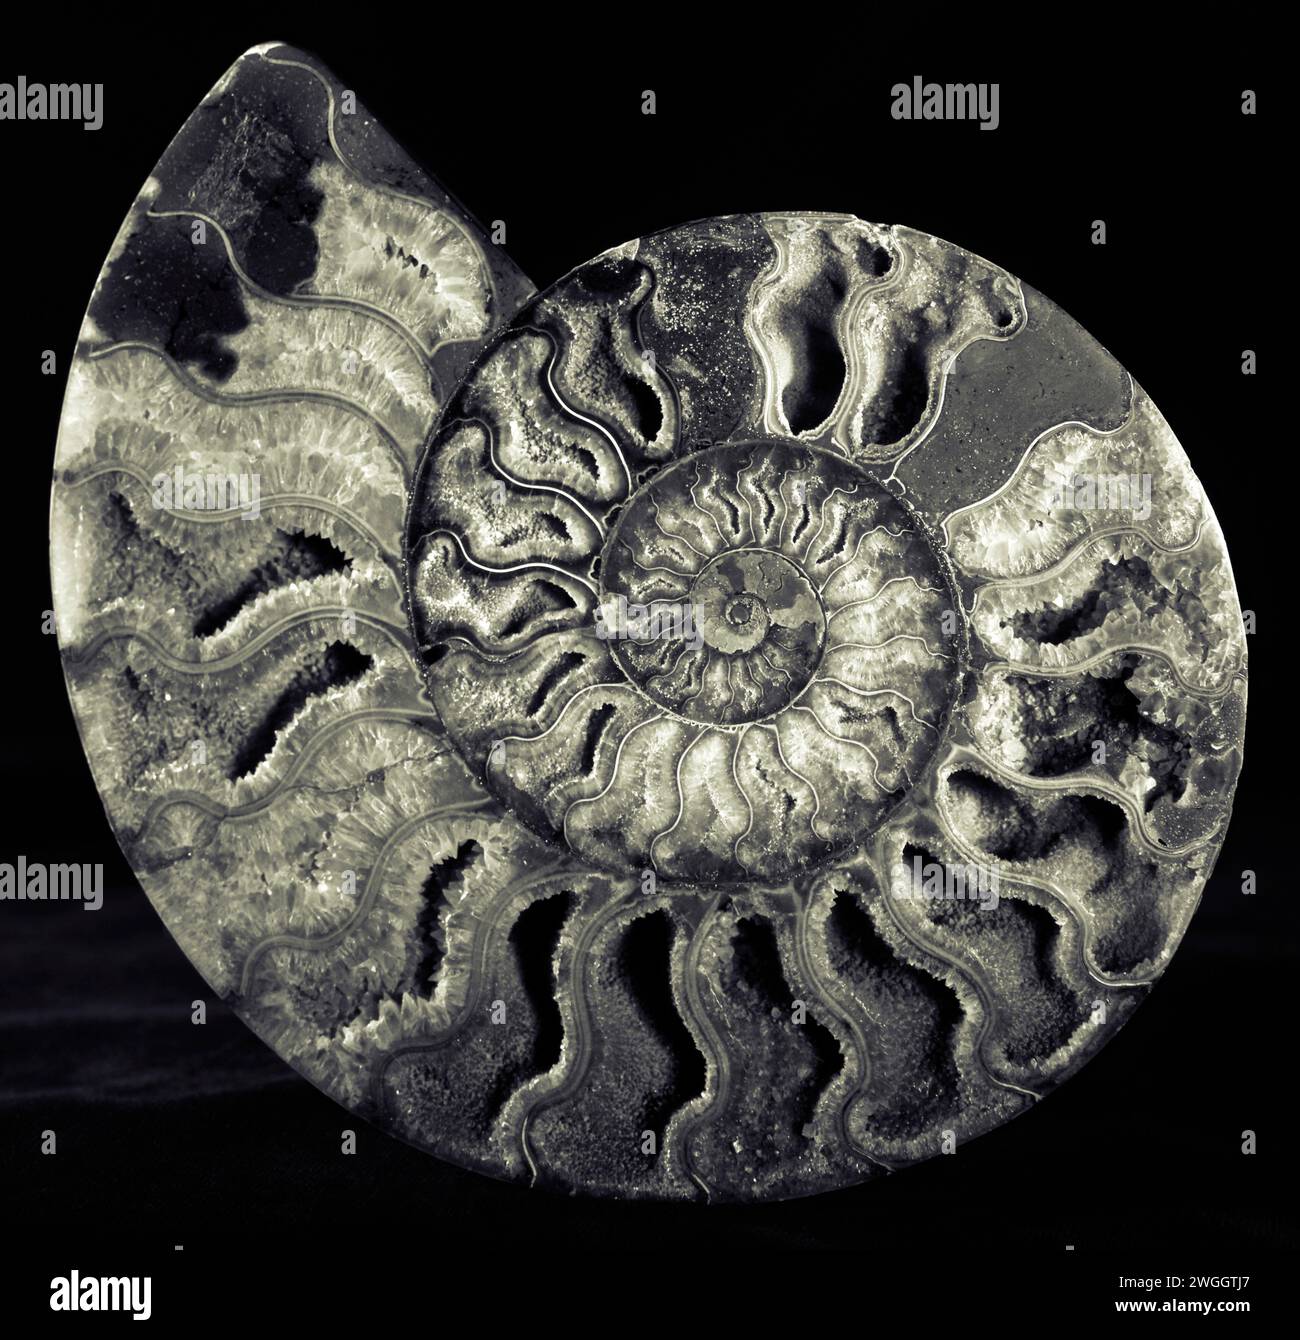 A crystalized, fossilized nautilus shell. Stock Photo